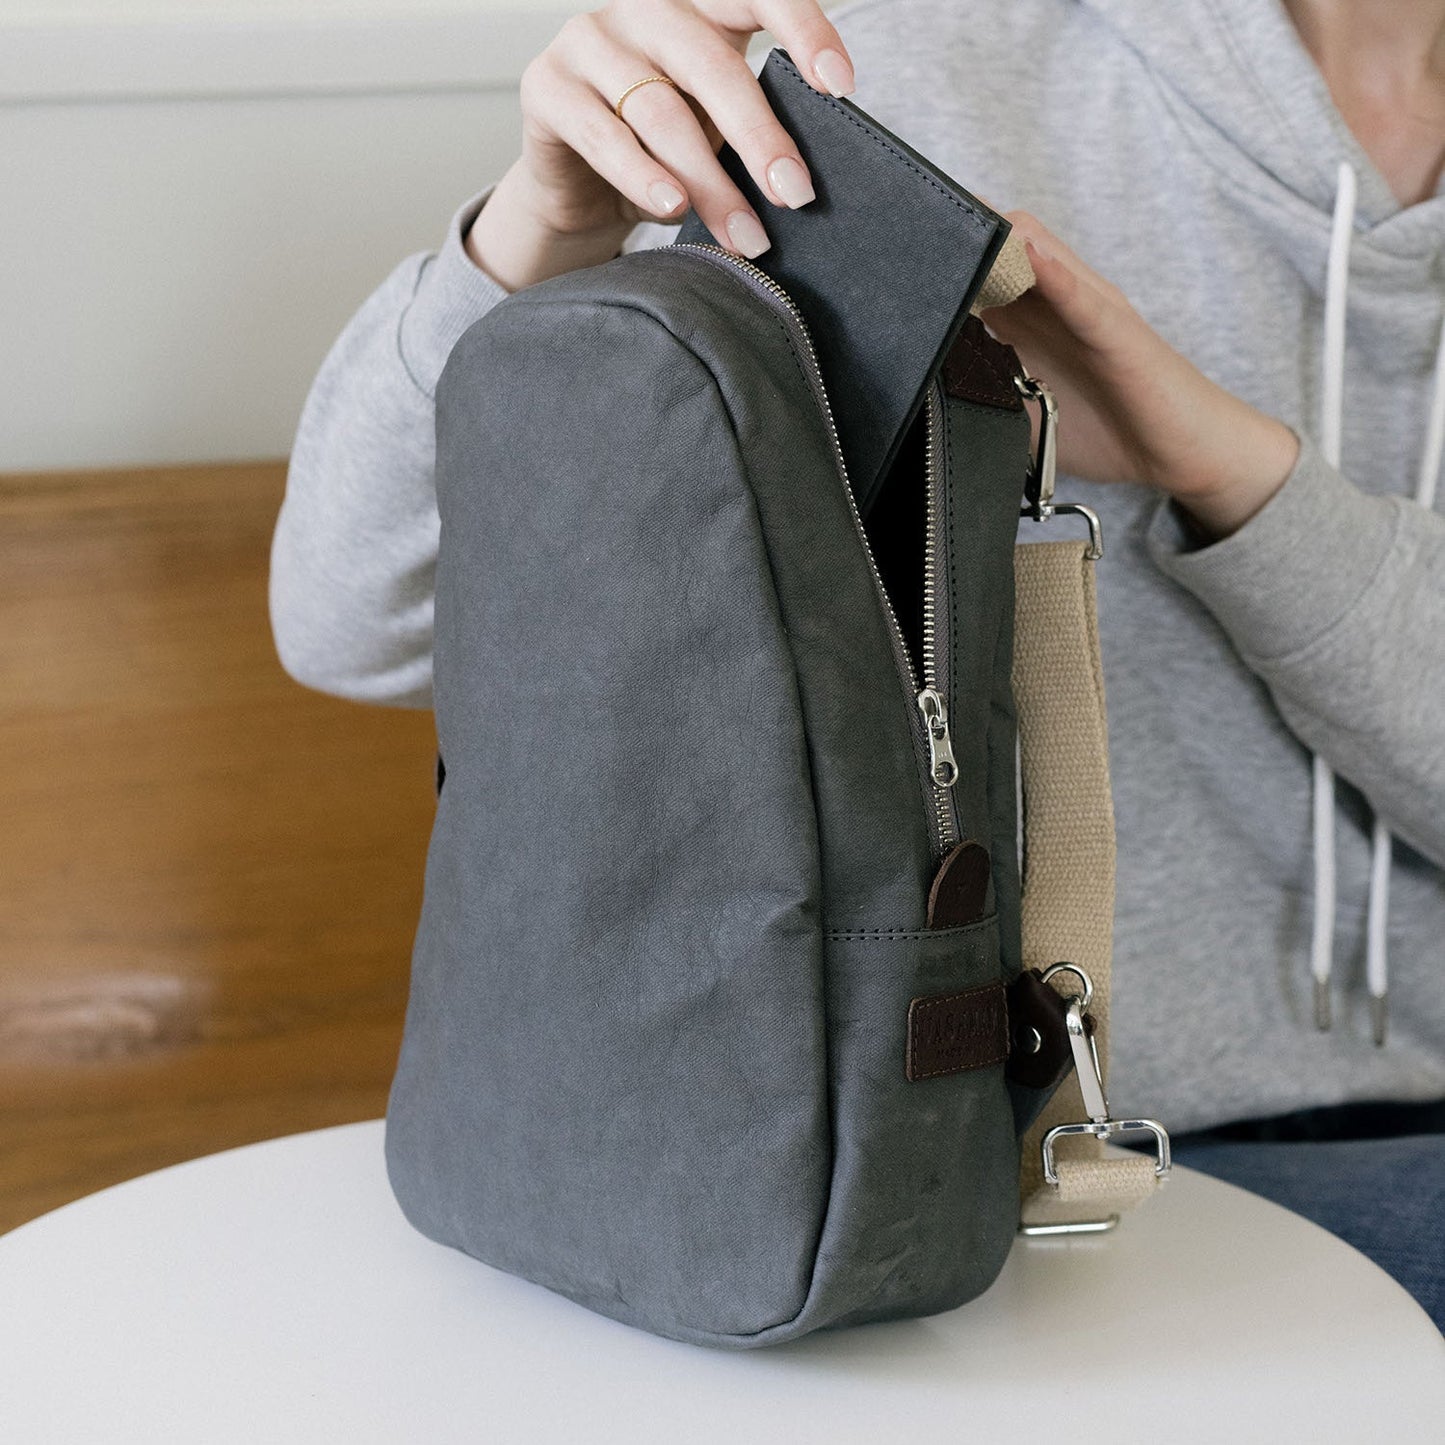 A woman is shown wearing a grey hoodie, seated at a table. On the table sits a grey washable paper backpack with a silver zip, a brown side tab, and natural toned cotton canvas straps. The woman is placing a washable paper pouch into the backpack.